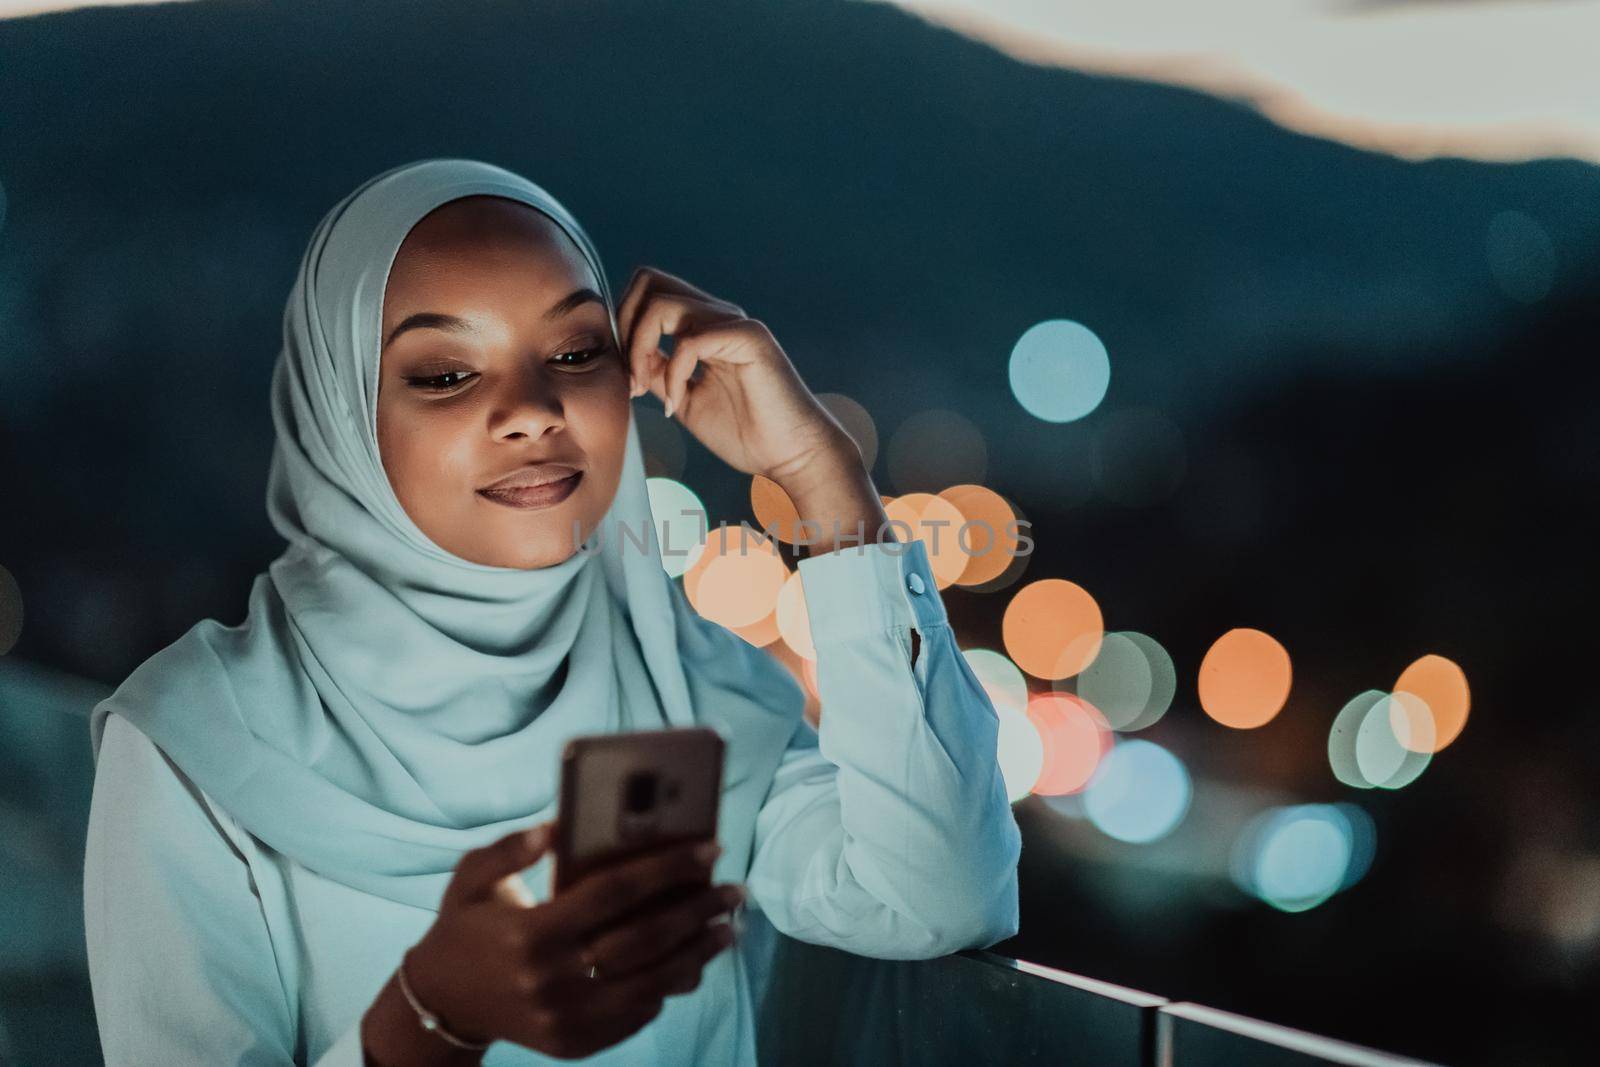 Young Muslim woman wearing scarf veil on urban city street at night texting on a smartphone with bokeh city light in the background. High-quality photo